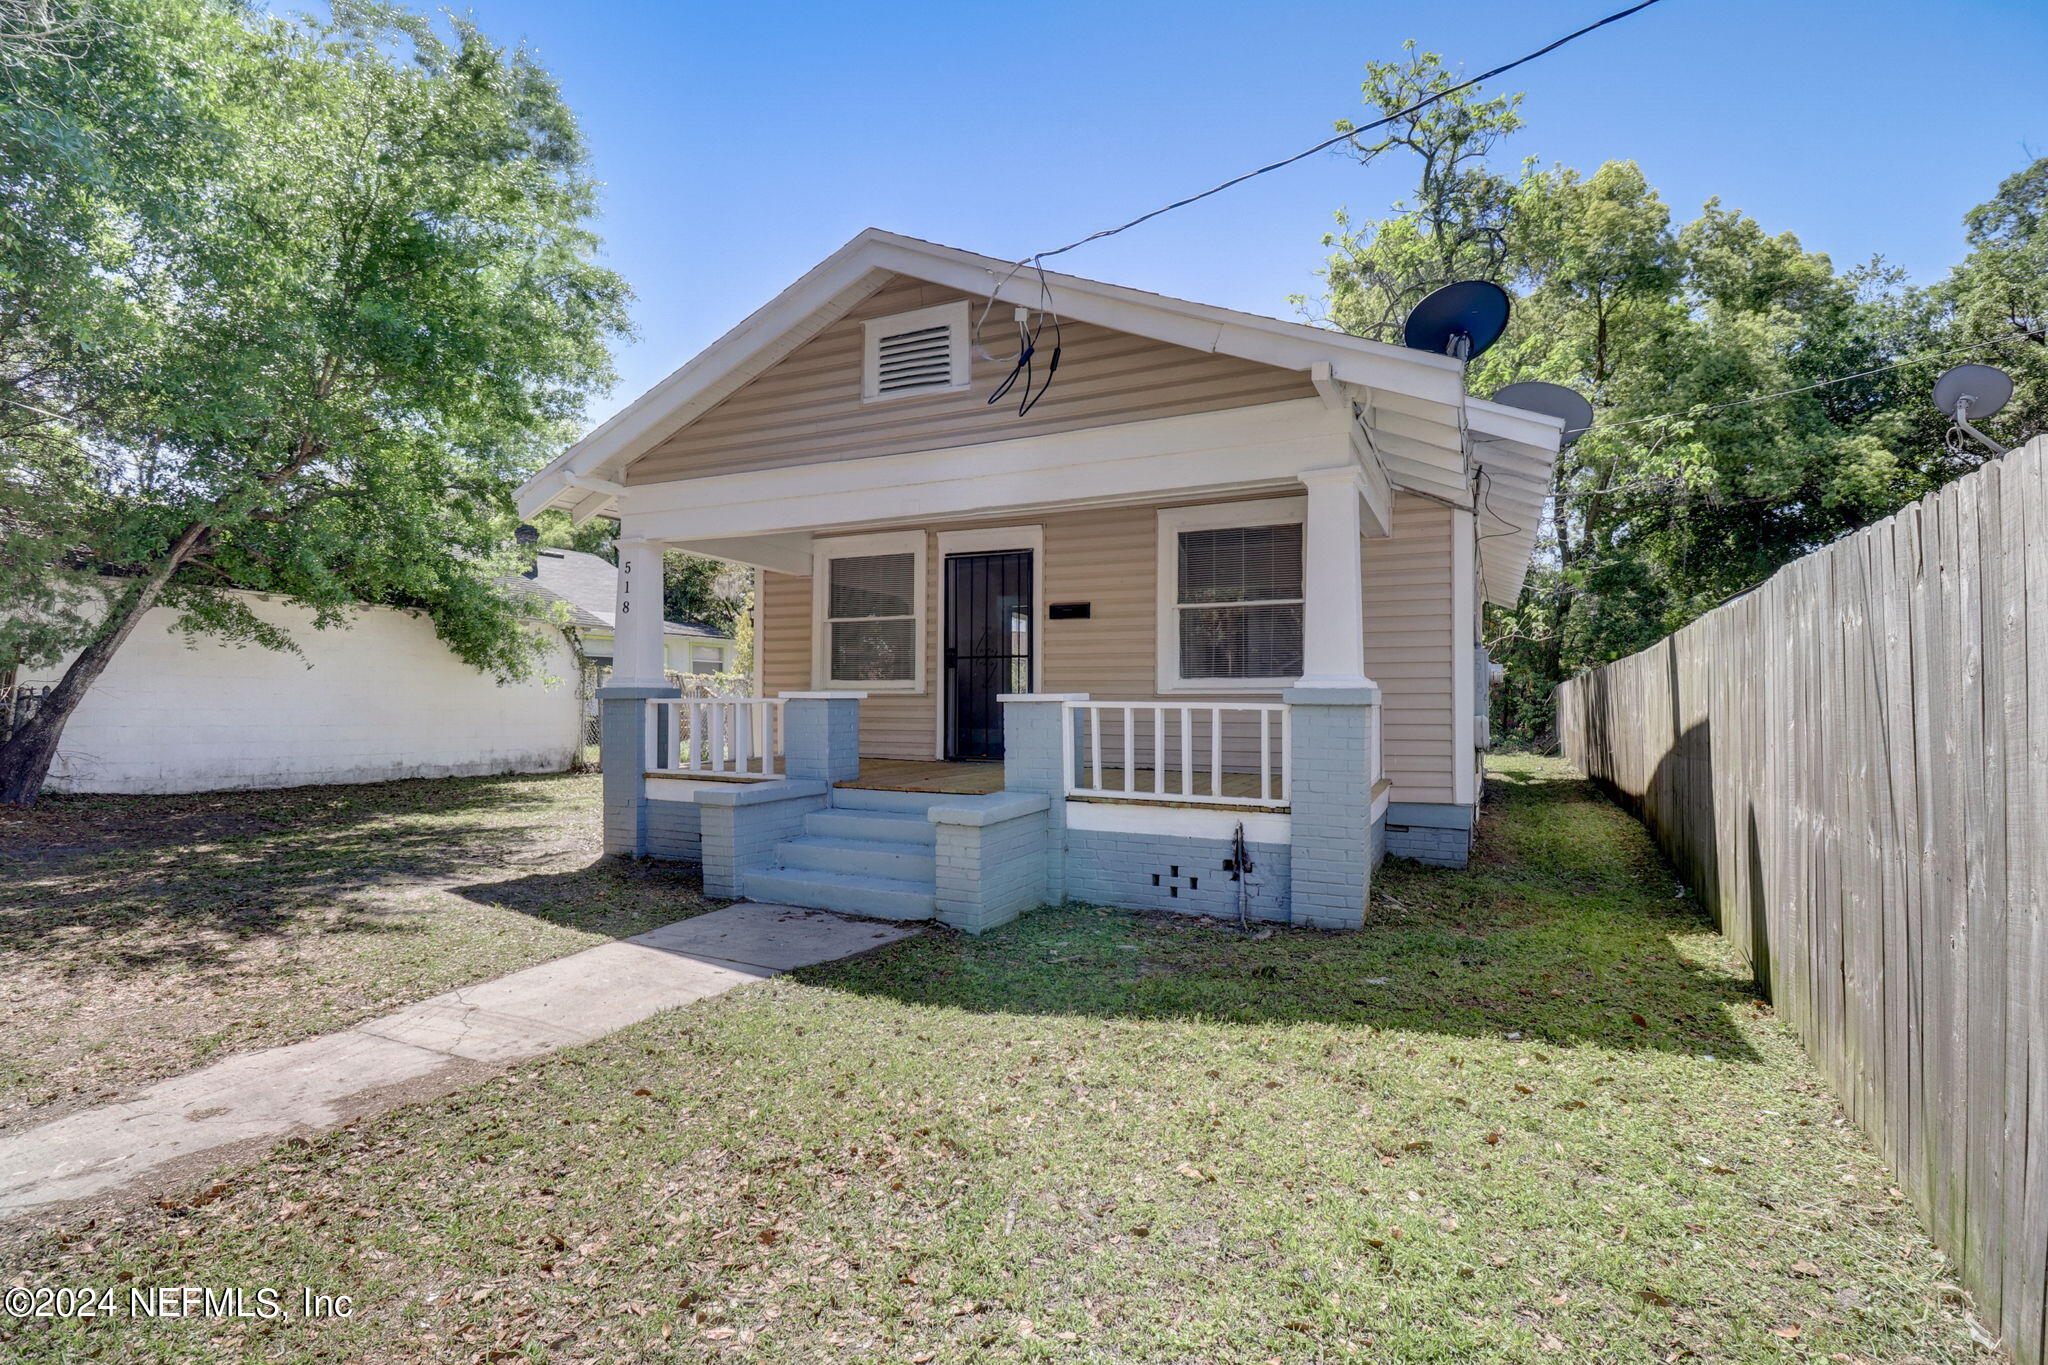 Jacksonville, FL home for sale located at 518 W 25th Street, Jacksonville, FL 32206